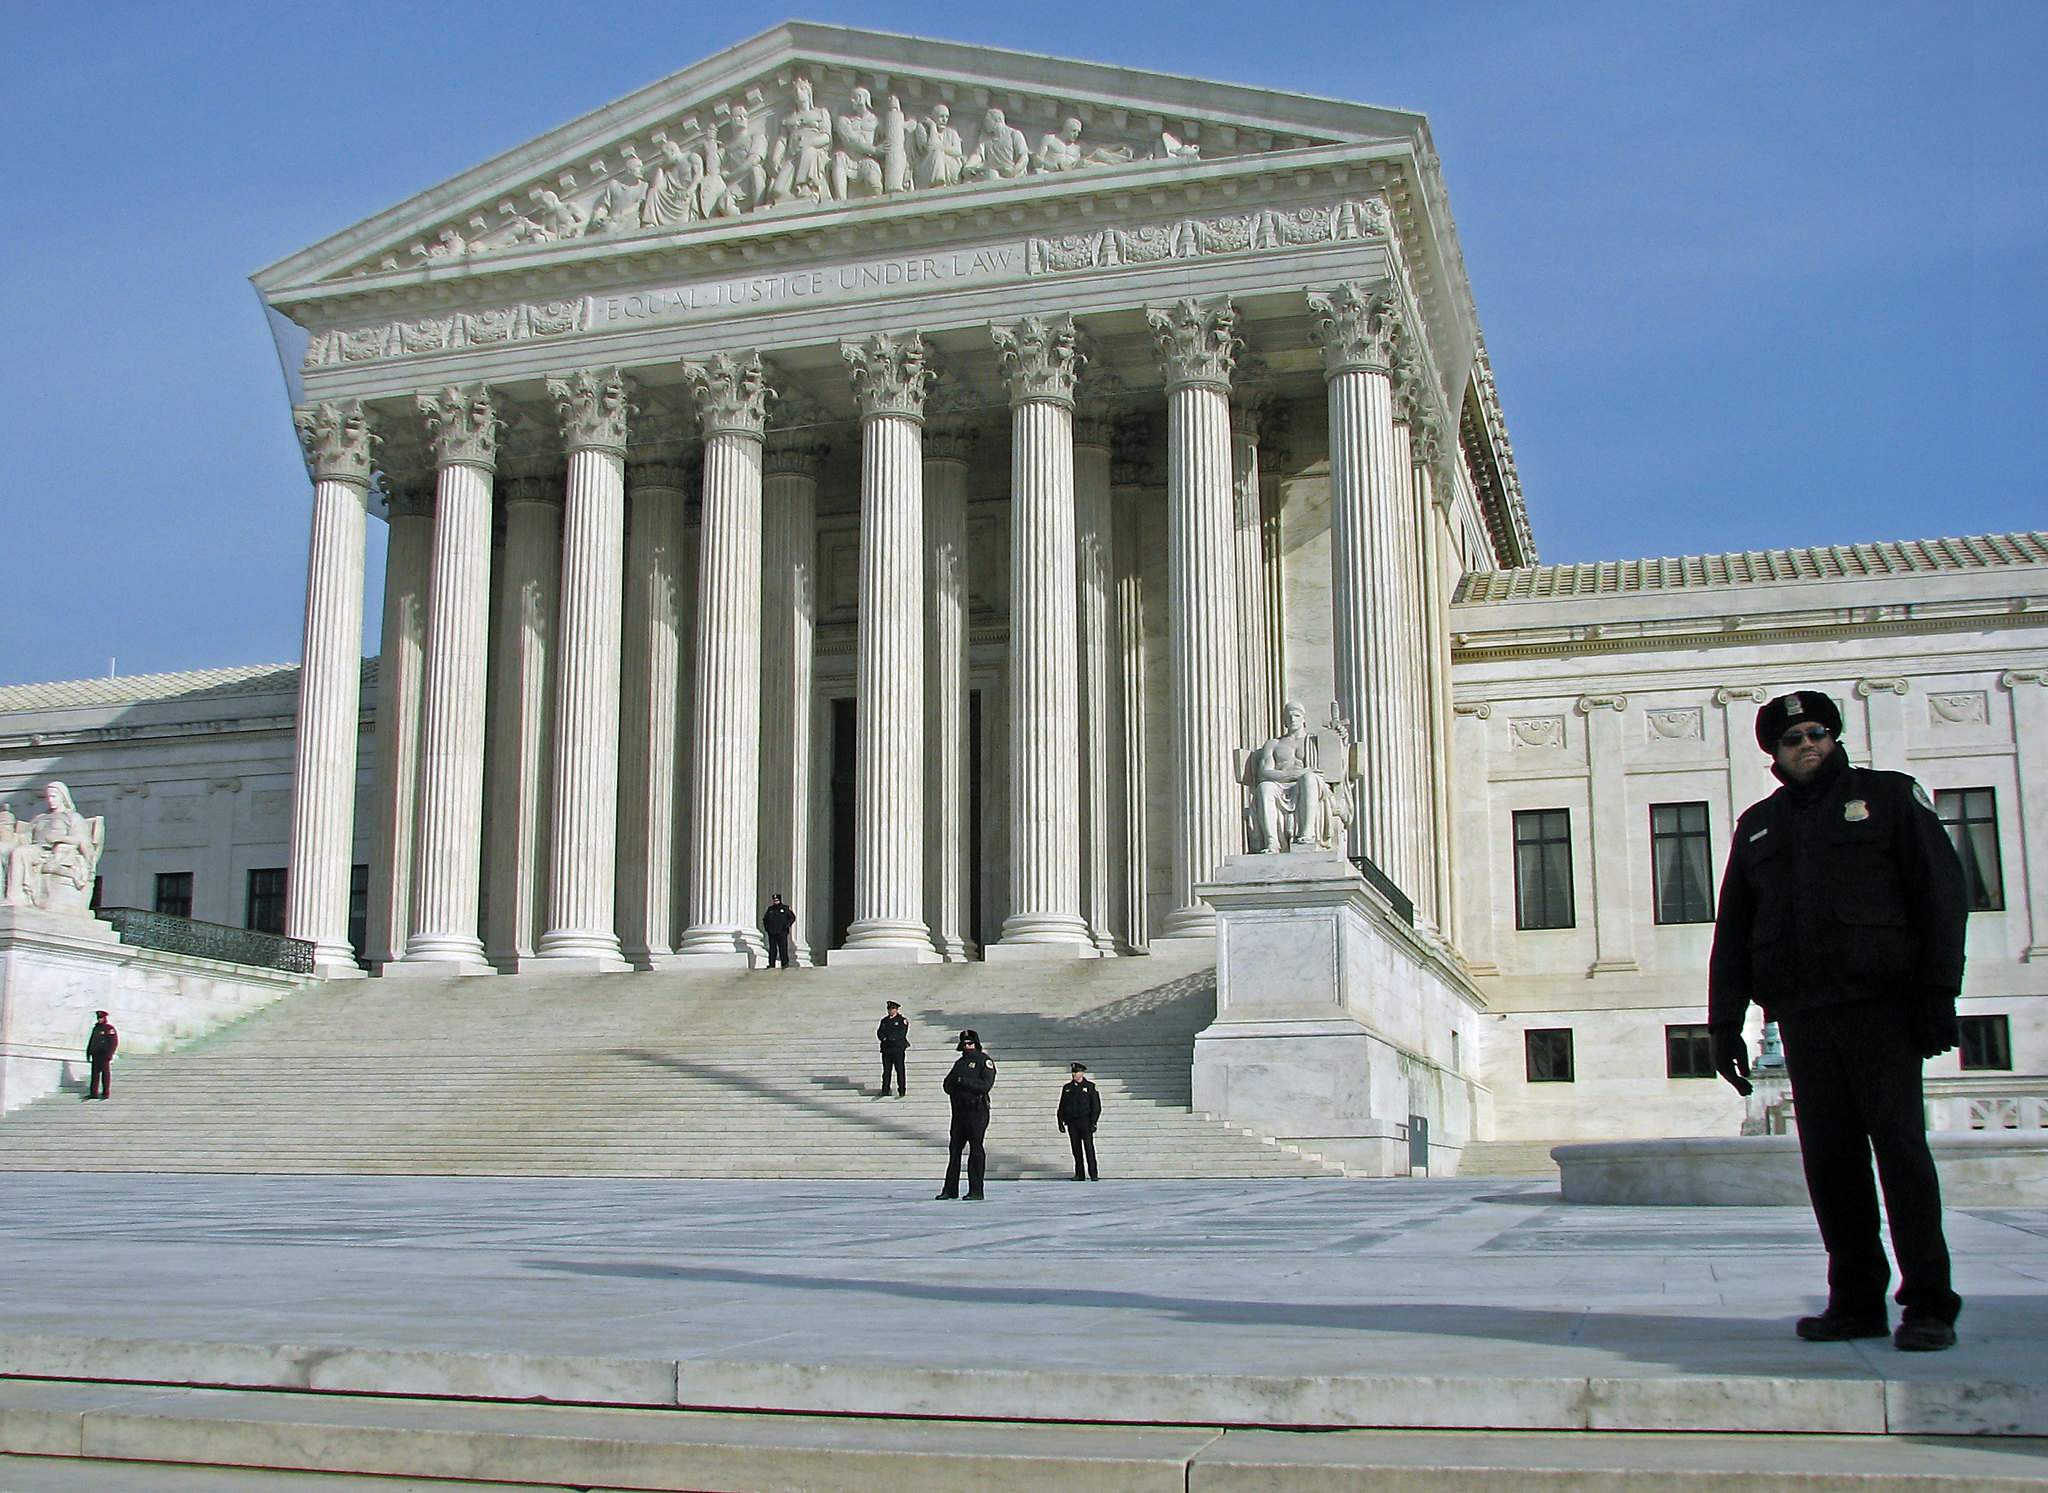 Supreme Court building with police officer standing on plaza